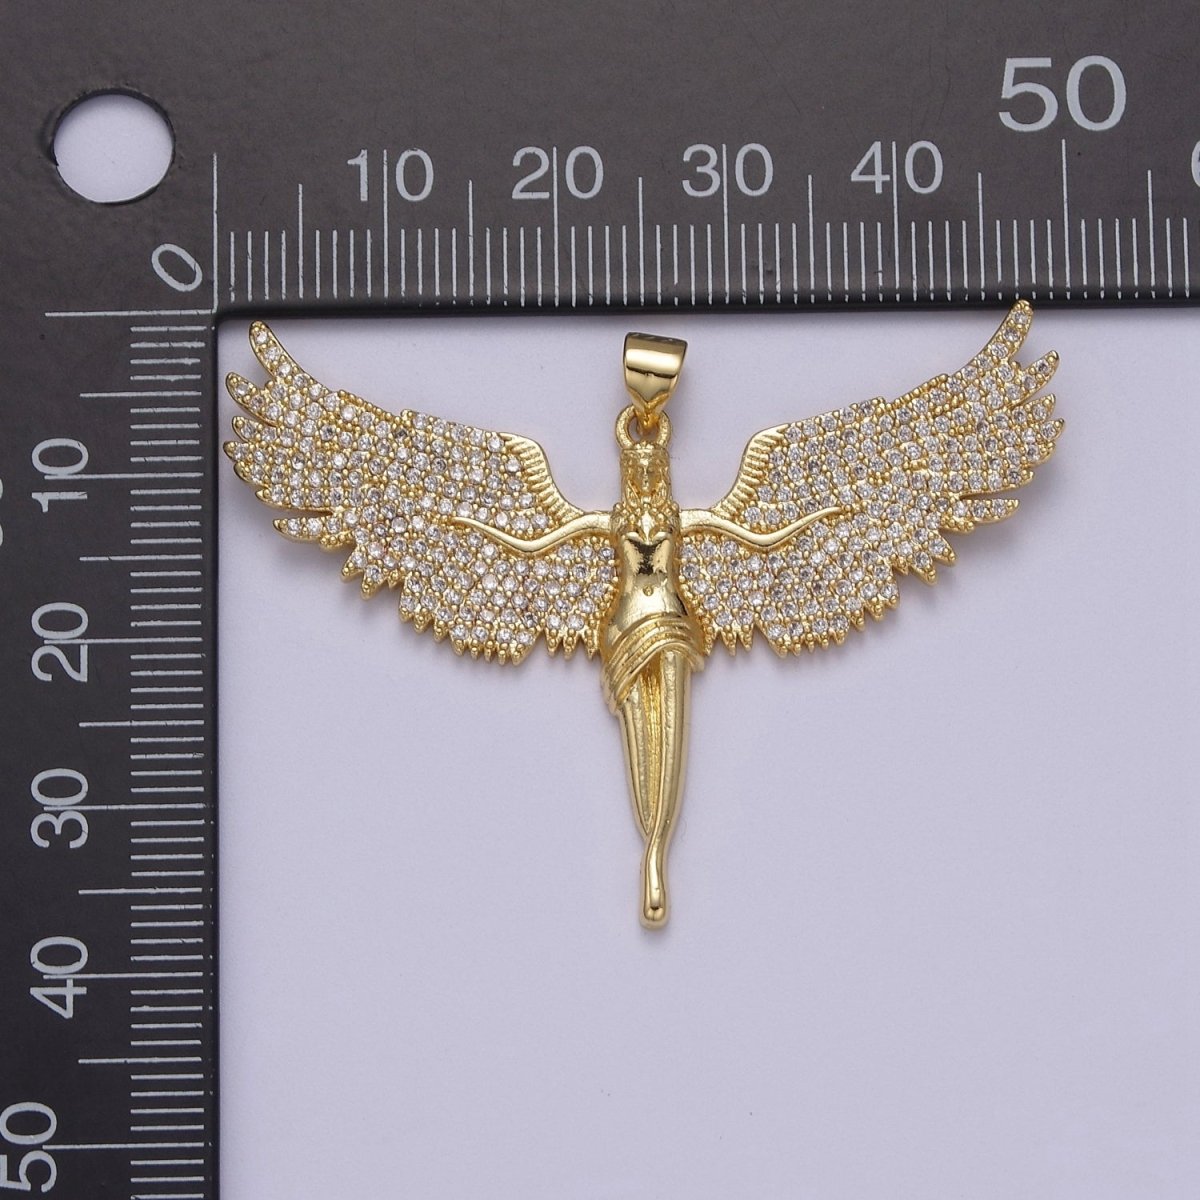 OS Big Gold Angel Necklace Pendant 14K Gold Filled Ascending Wings with Cubic Zirconia Stones Archangel Guardian Angel Religious Jewelry Patron Saint J-347 - DLUXCA